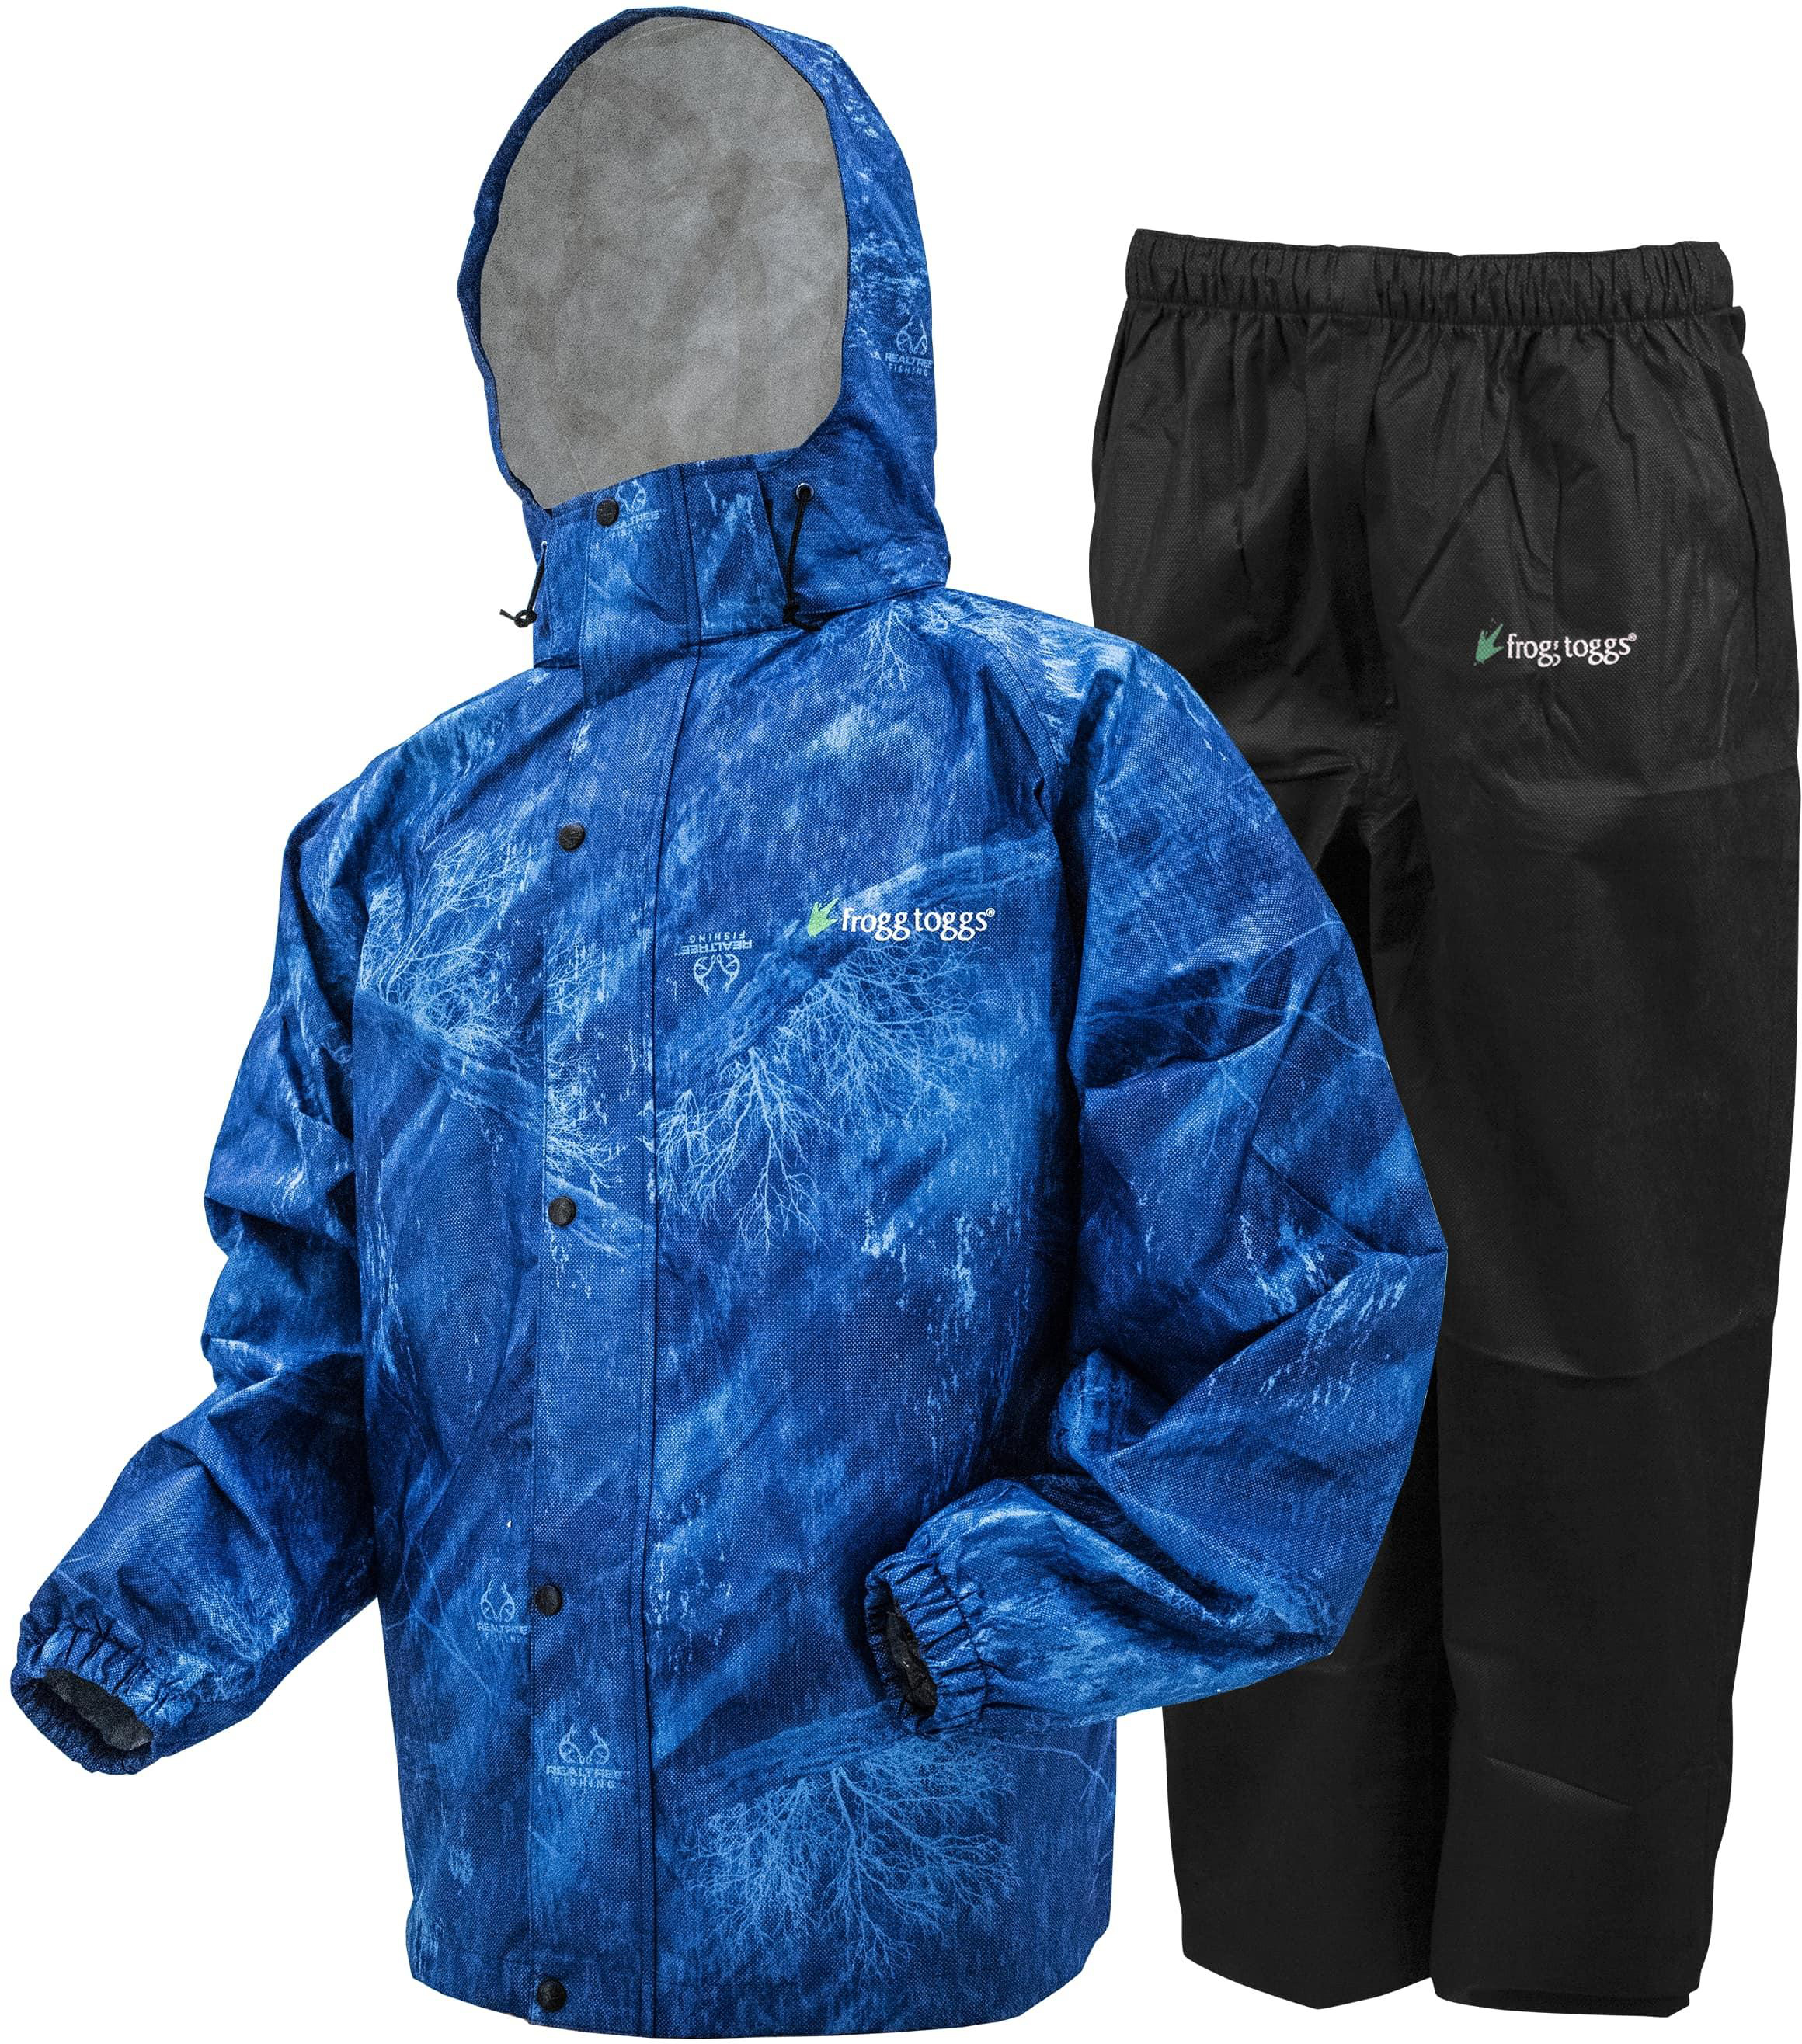 Frogg Toggs All-Sport Rain Suit - Mens  Up to $4.00 Off w/ Free Shipping  and Handling